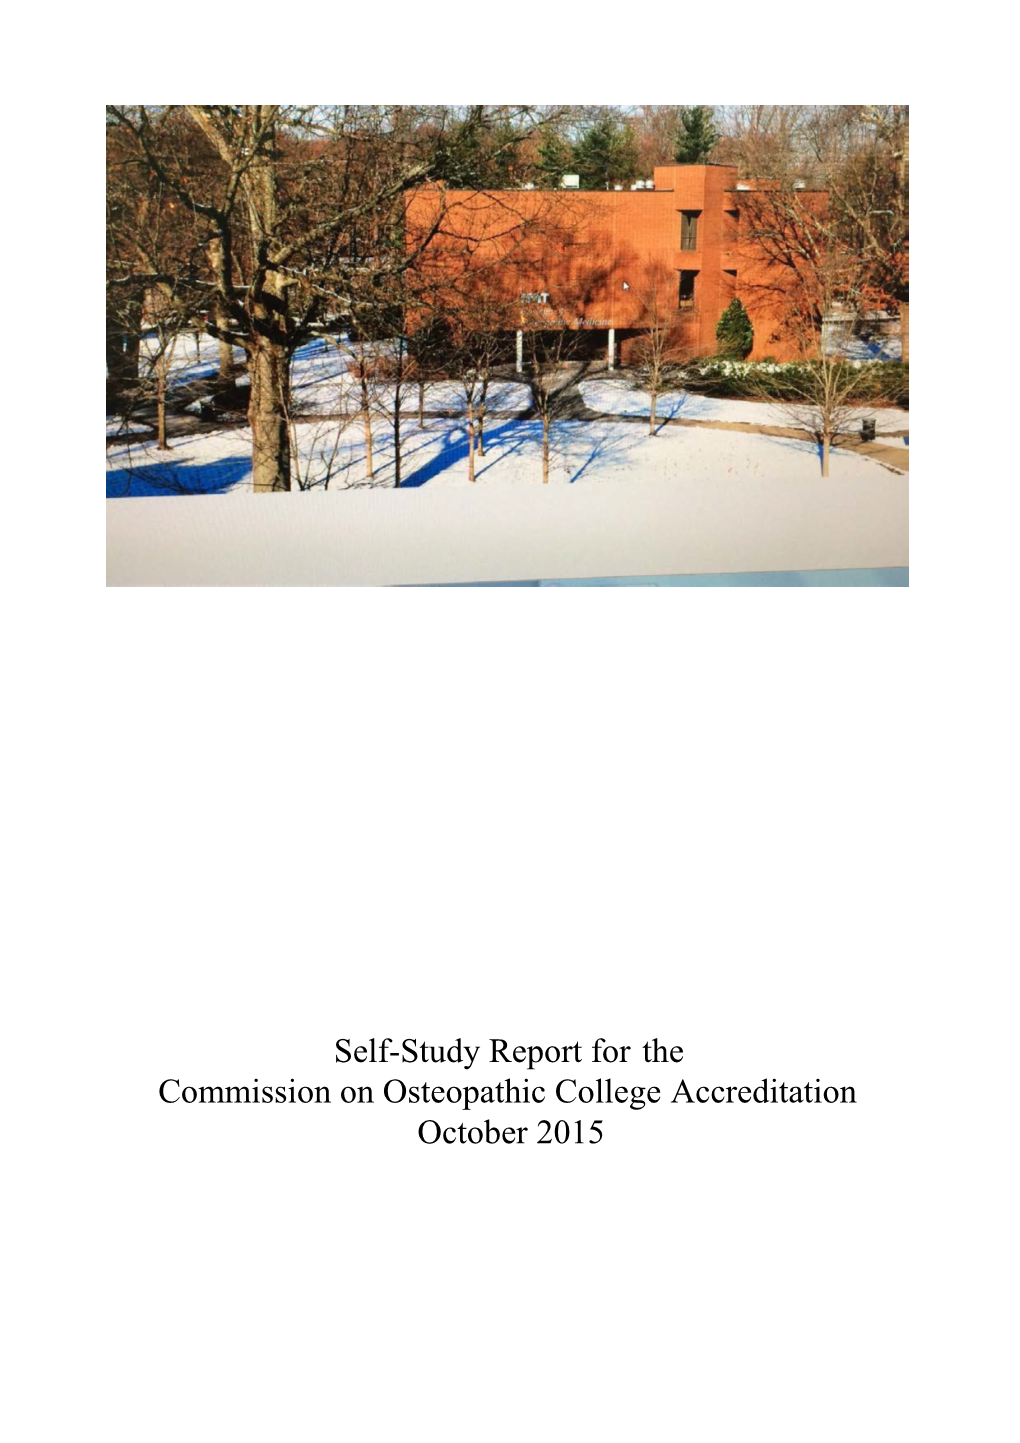 Self-Study Report for the Commission on Osteopathic College Accreditation